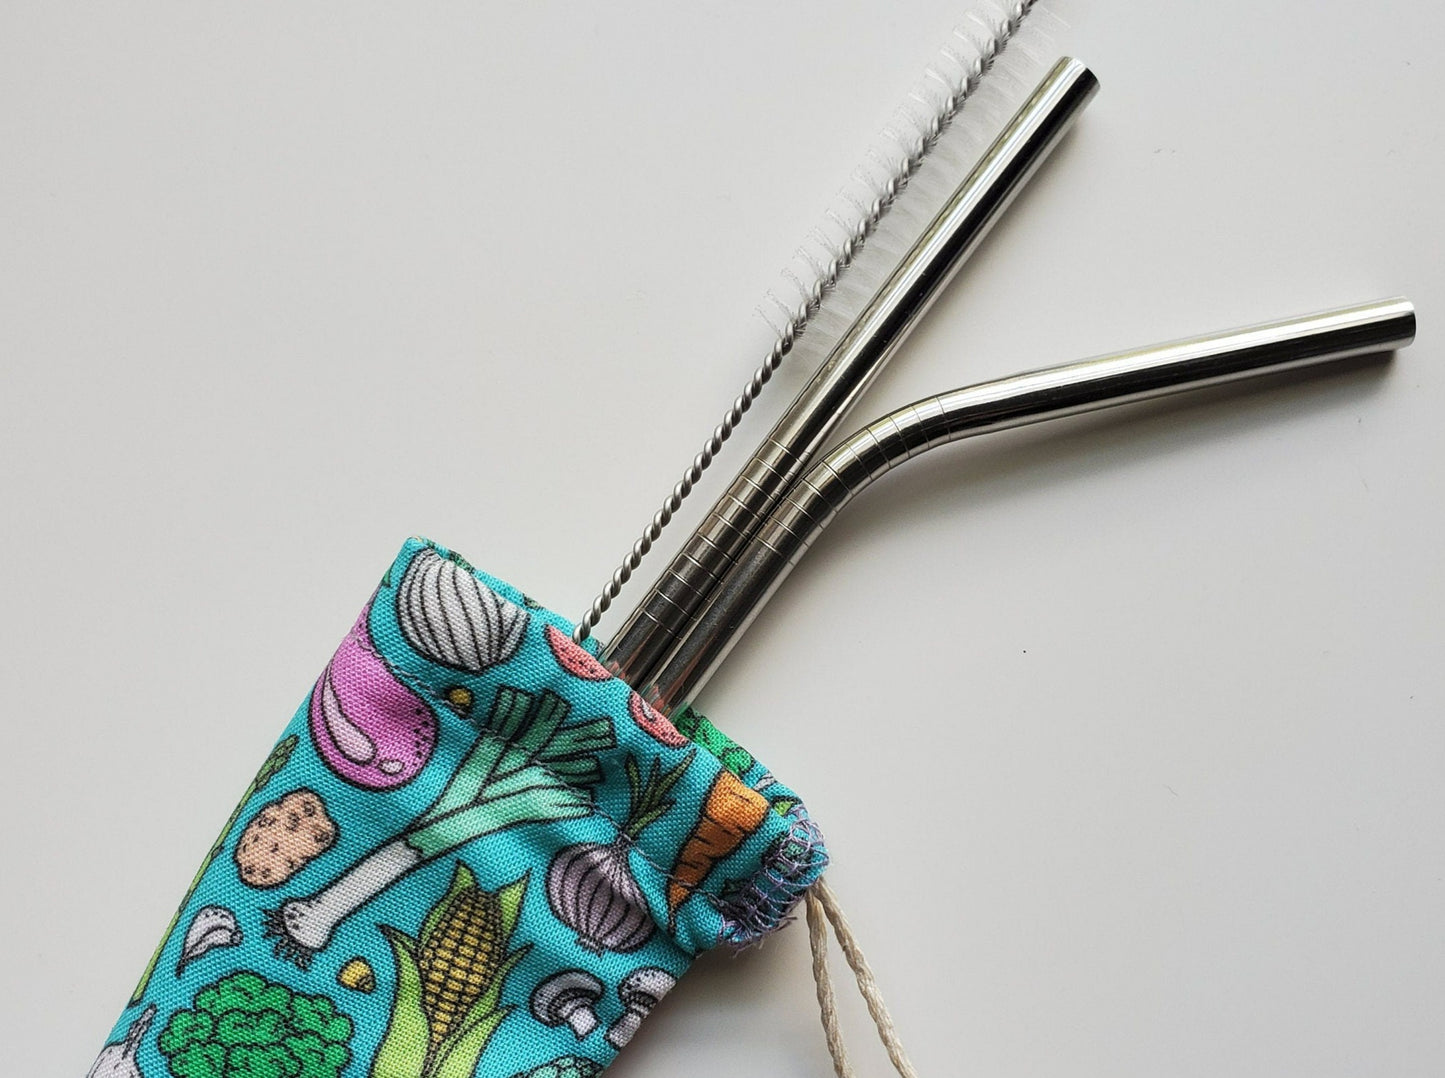 Reusable straw pouch with stainless steel straws sticking out the top. The fabric of the pouch is teal blue with various cartoon brightly colored vegetables like broccoli, carrots, radishes, etc and it has a drawstring closure.